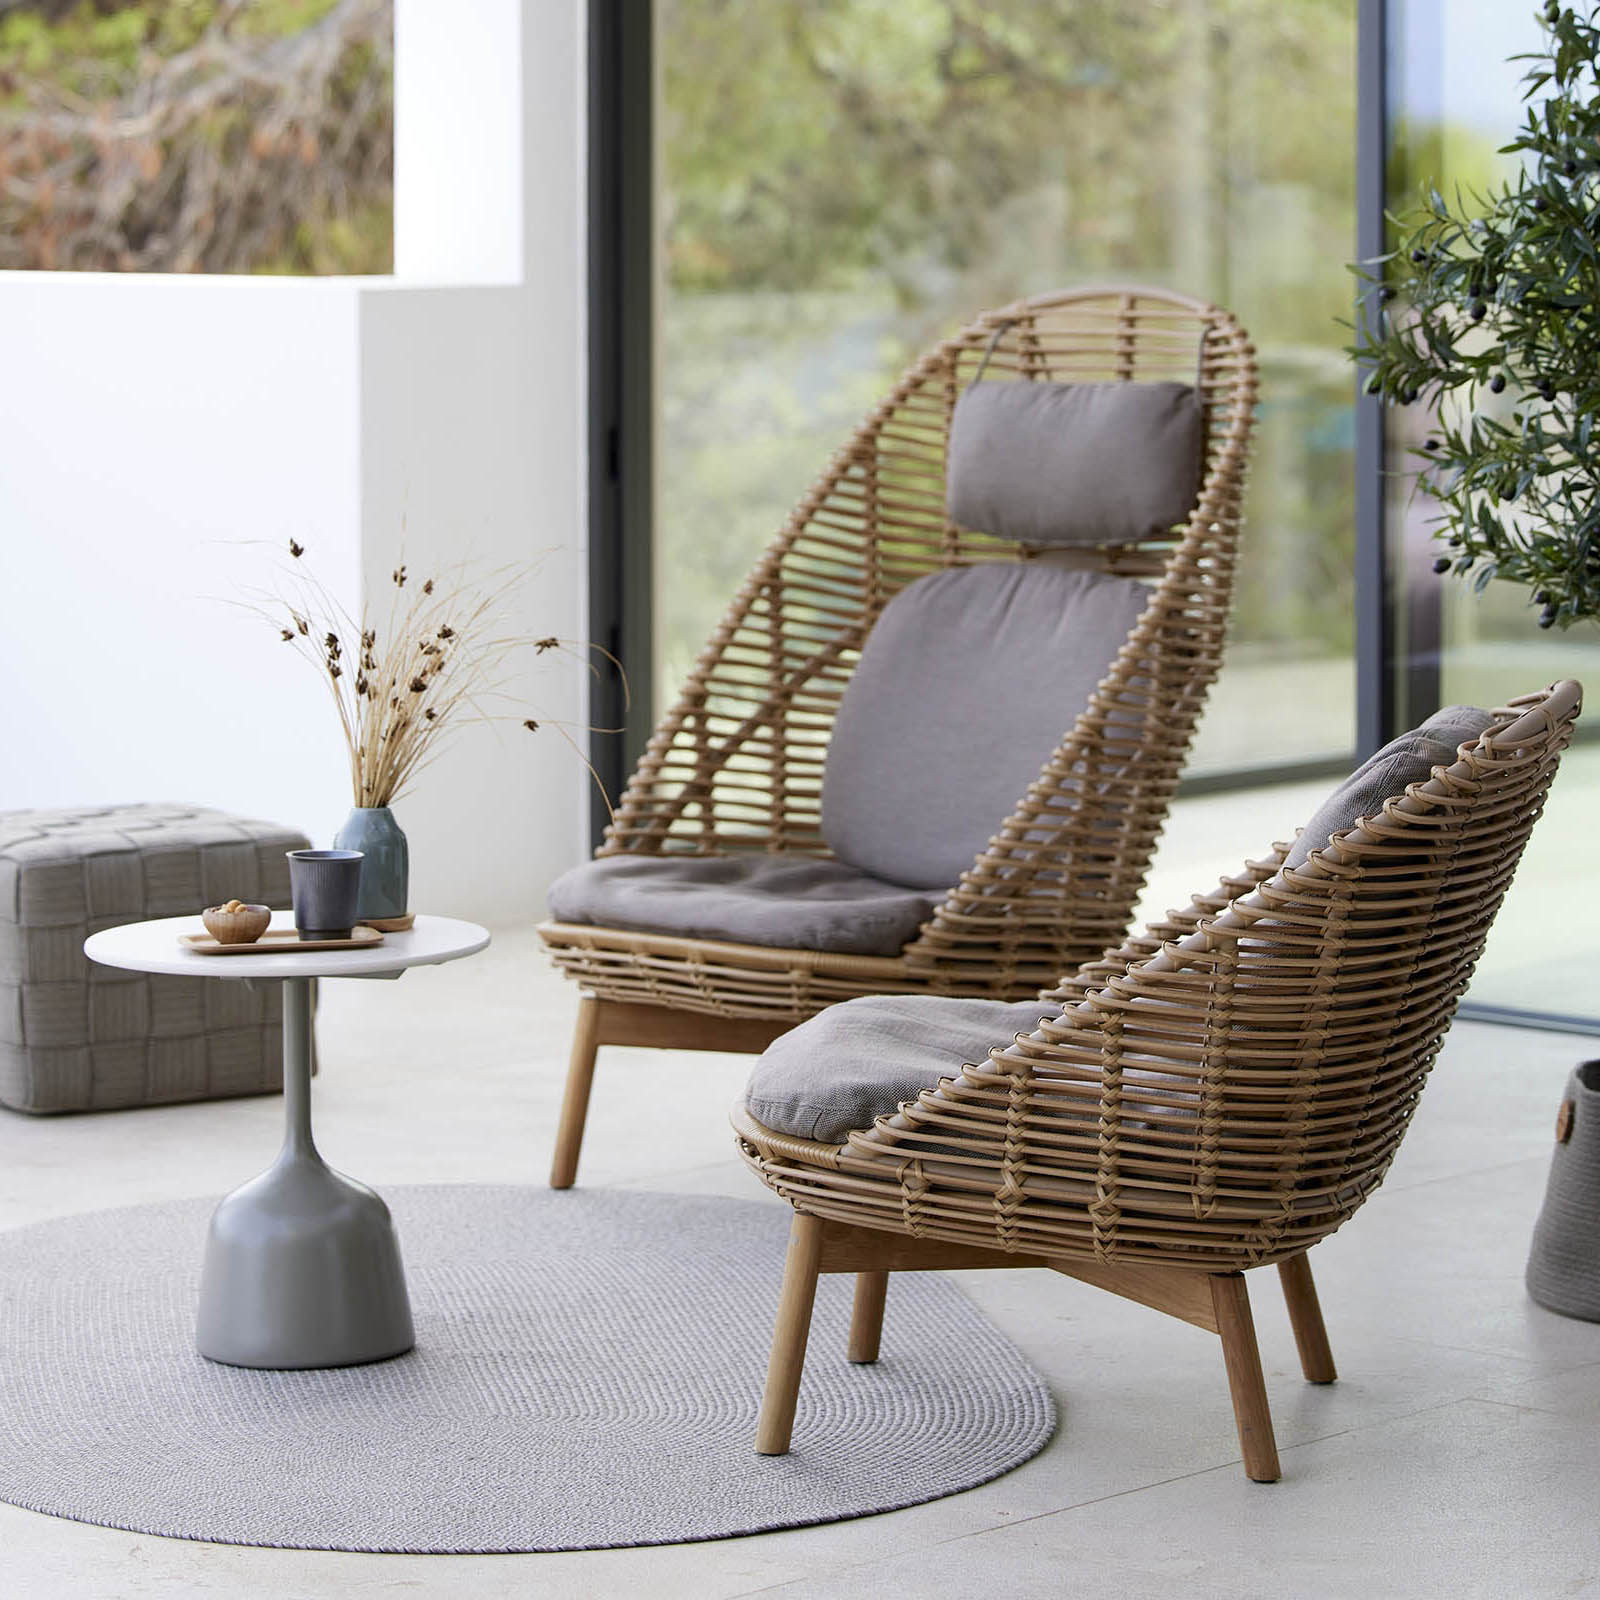 Hive Loungesessel aus Cane-line Weave in Natural mit Kissen aus Cane-line Link in Light Green